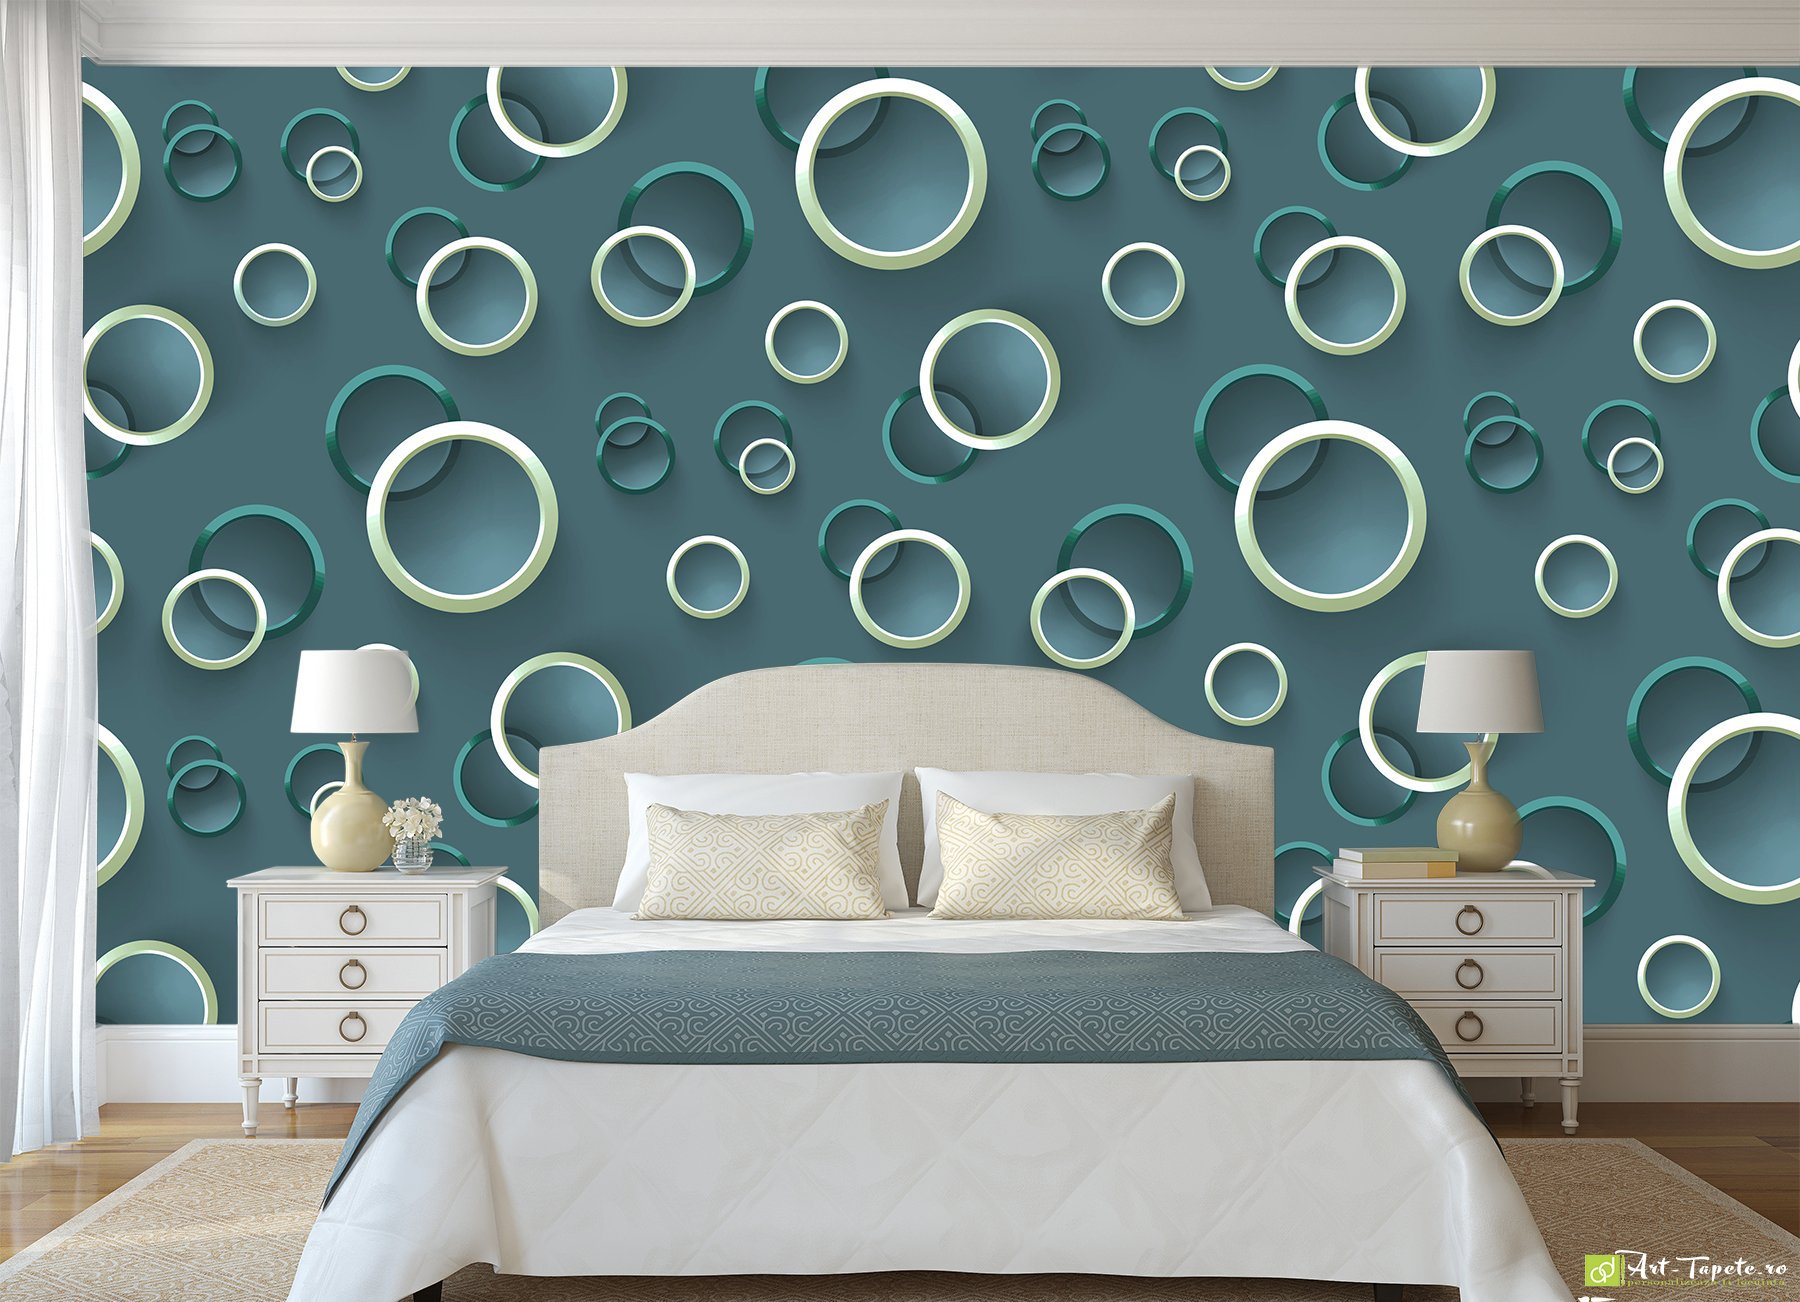 Photo Wallpaper 3D Effect - Circles, emerald background  3D  wallpapers give the illusion of added depth